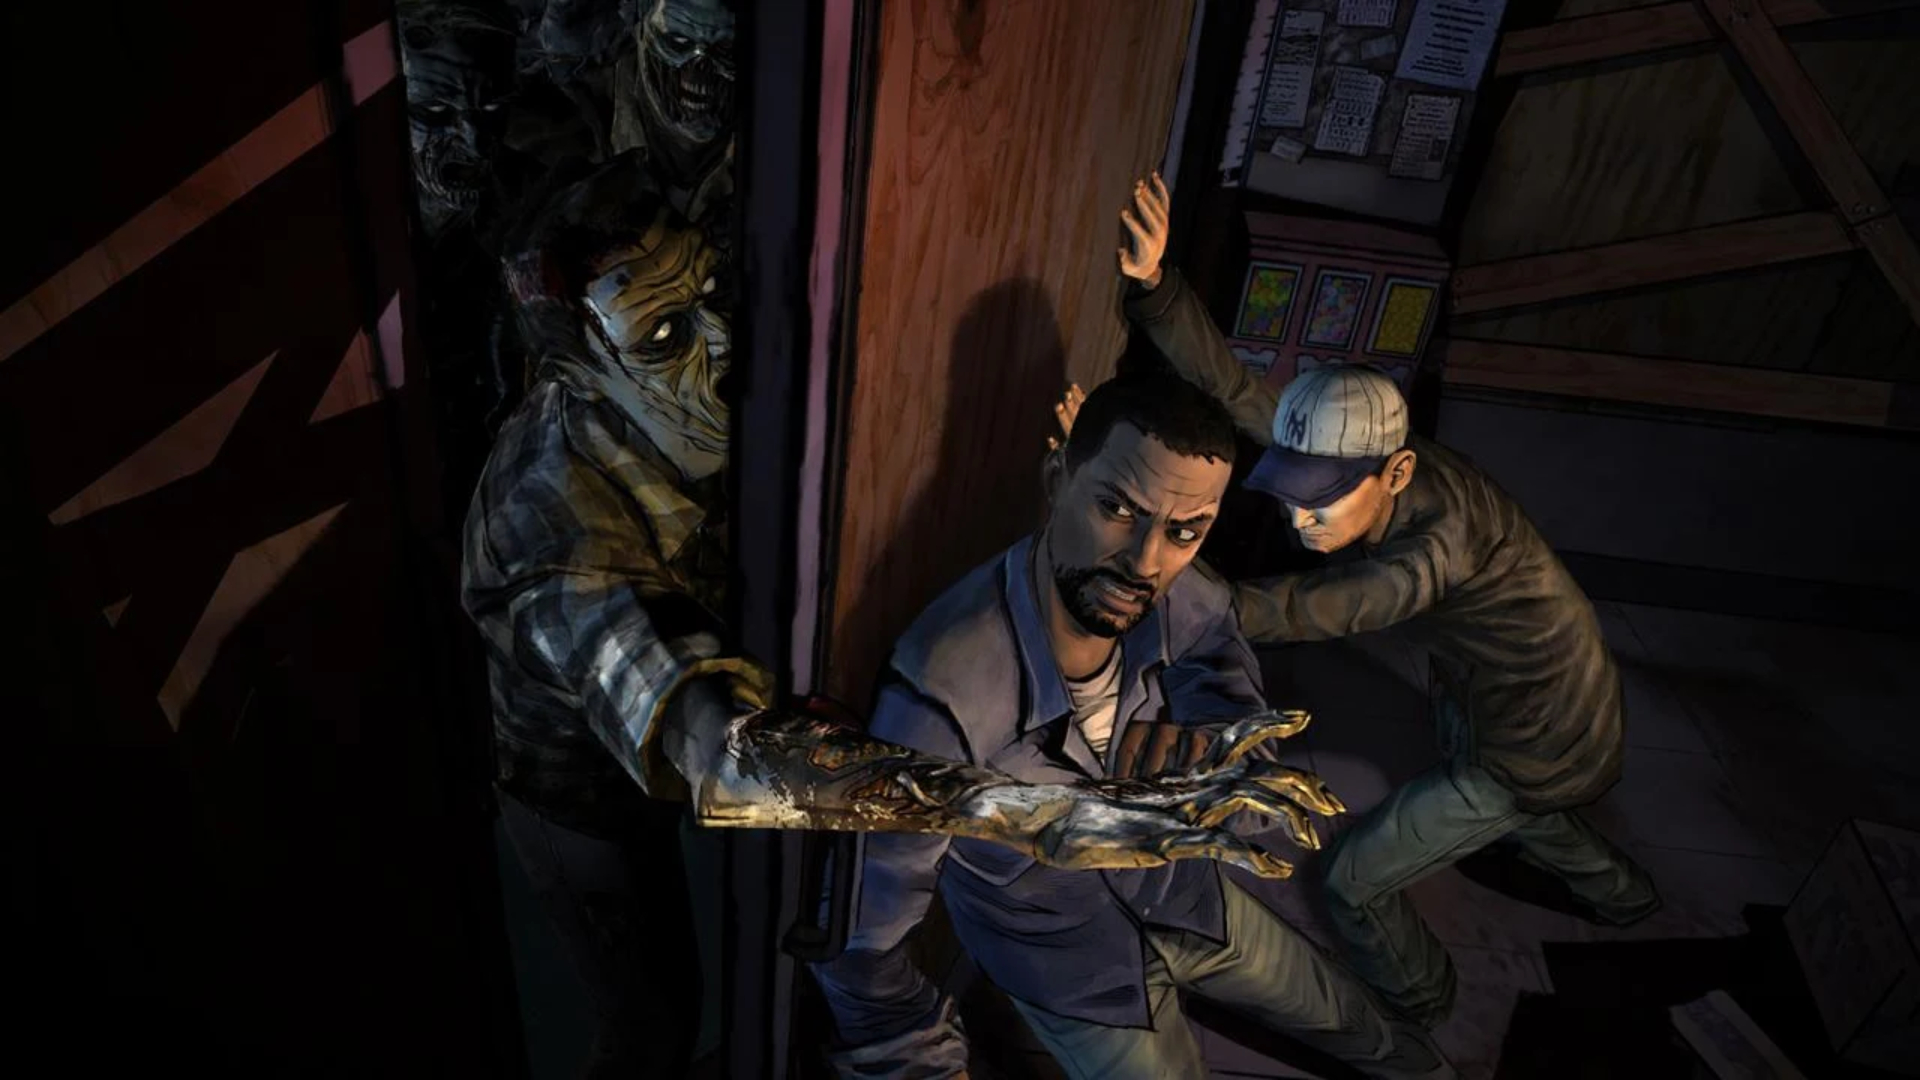 Best zombie games: The Walking Dead. Image shows People trying to shut a door with zombies breaking in.